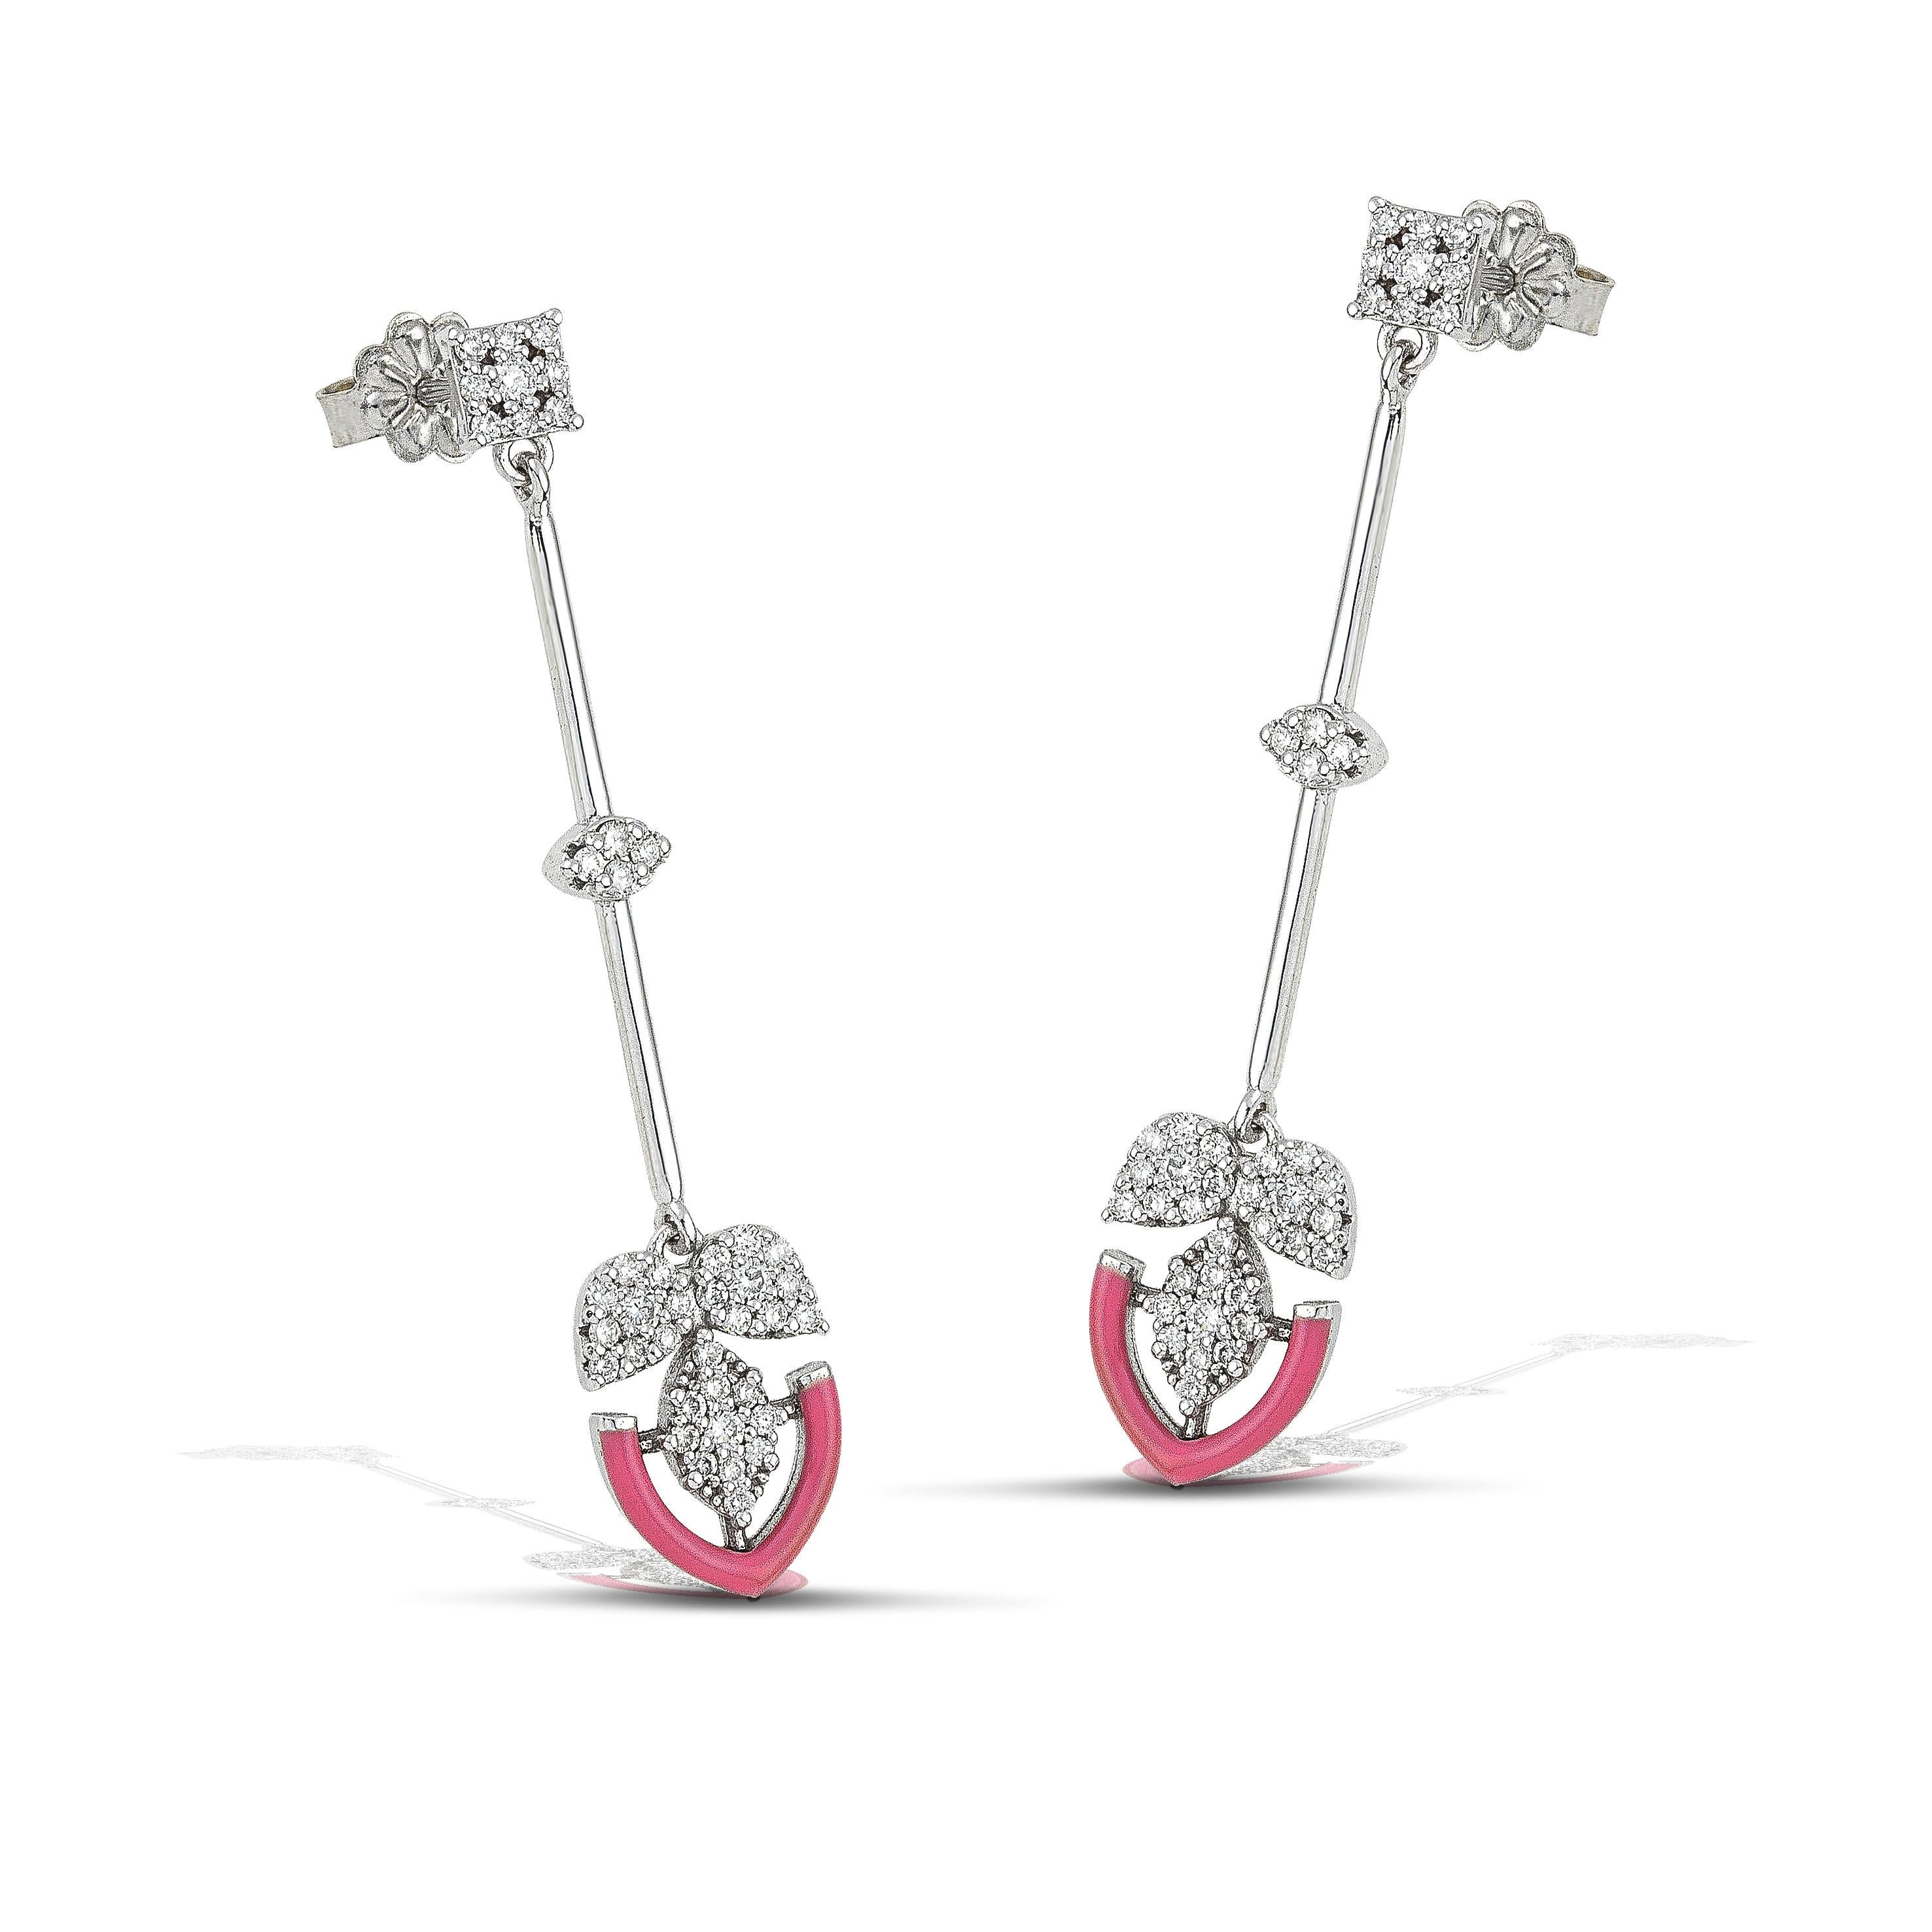 14K gold diamond earrings with a bold navy colour accent, the perfect gift for yourself or a loved one.
100% Recycled 14 K White Gold
Diamonds
Pink Enamel
Size: 5cm/1,96 inches
Inspiration: In the arts, maximalism, a reaction against minimalism, is